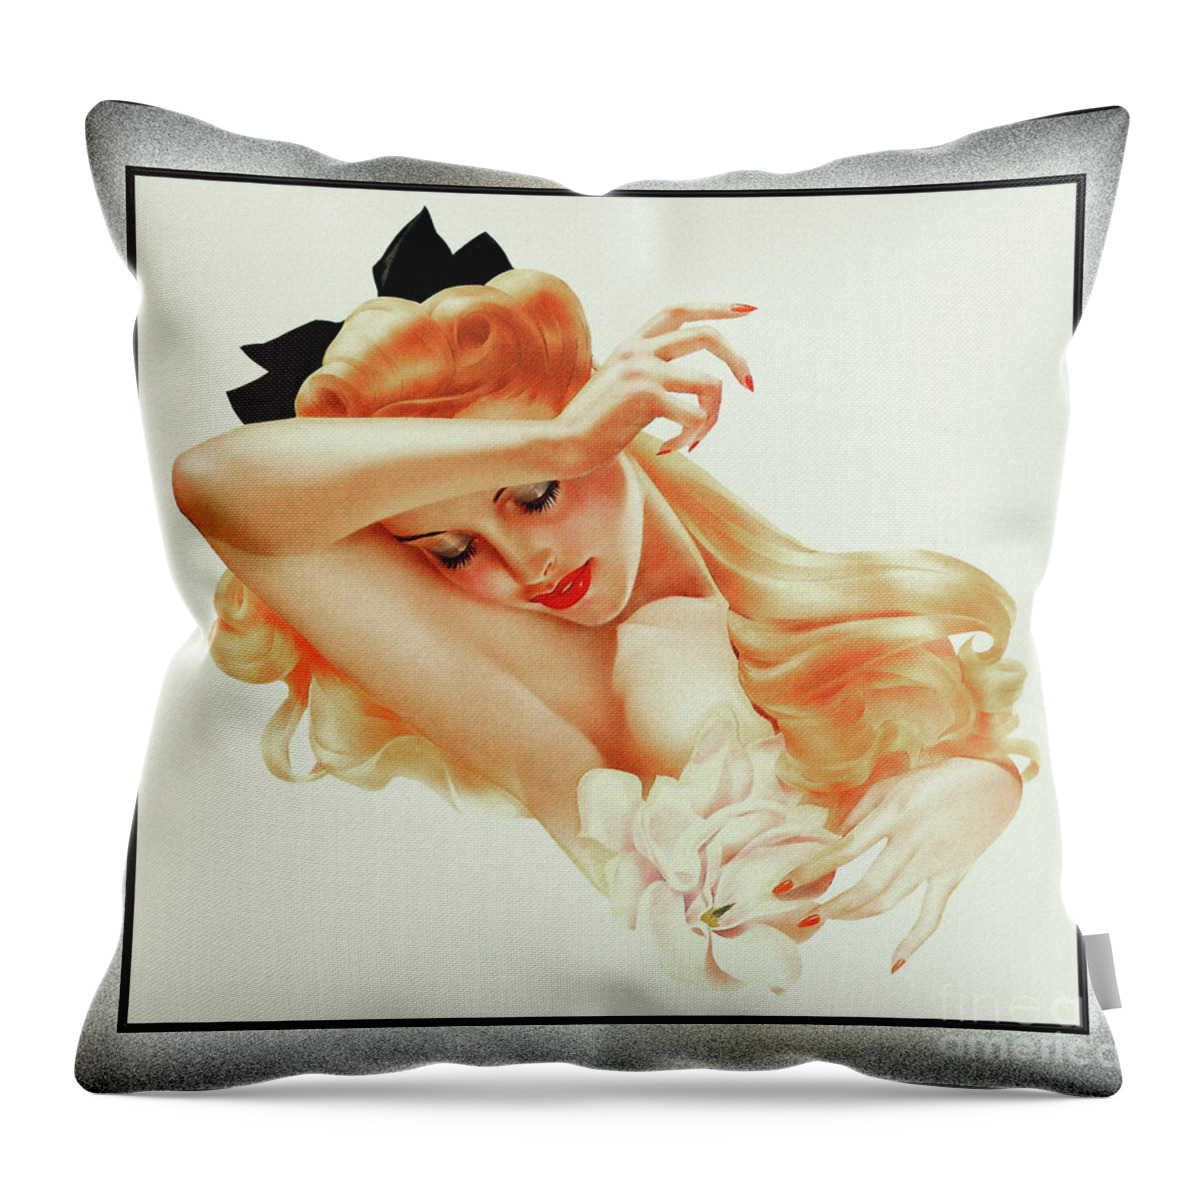 Sweet Dreams Throw Pillow featuring the painting Sweet Dreams by Alberto Vargas Vintage Pin-Up Girl Art by Rolando Burbon